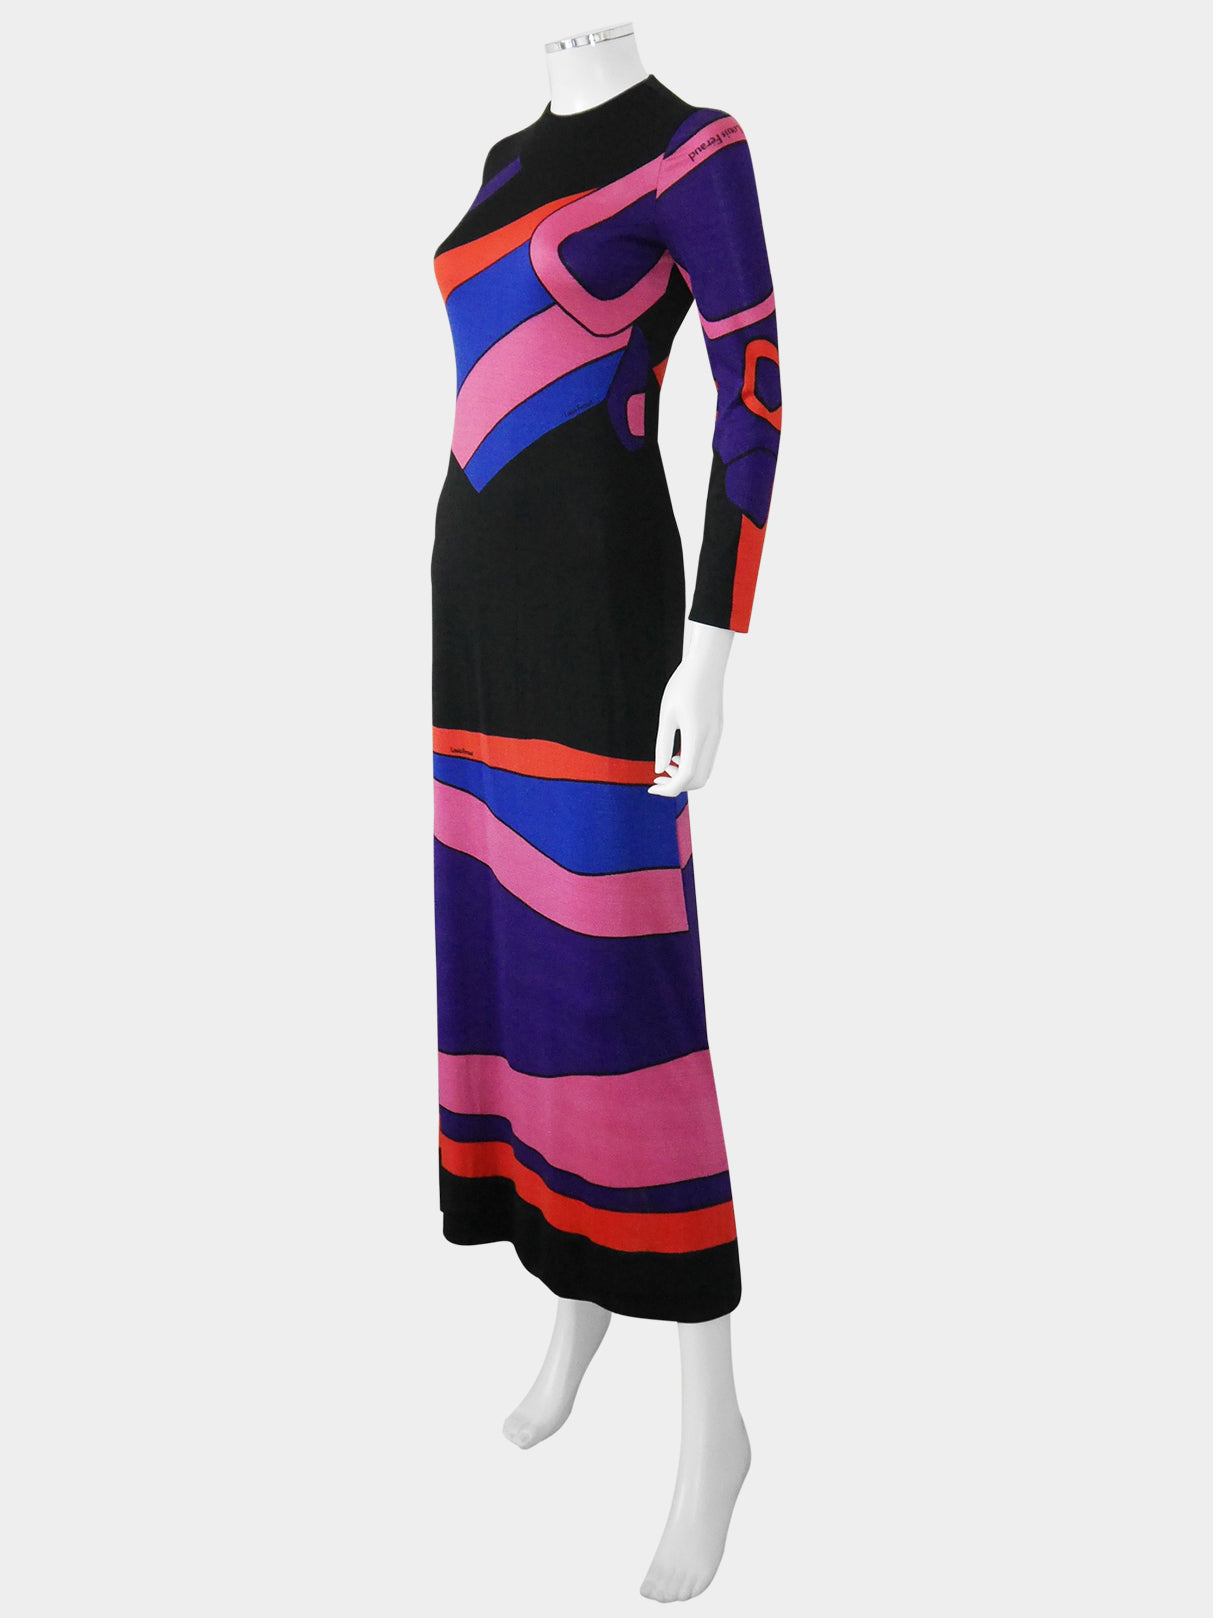 LOUIS FÉRAUD 1960s 1970s Vintage Psychedelic Graphic Print Maxi Dress & Scarf Size XS